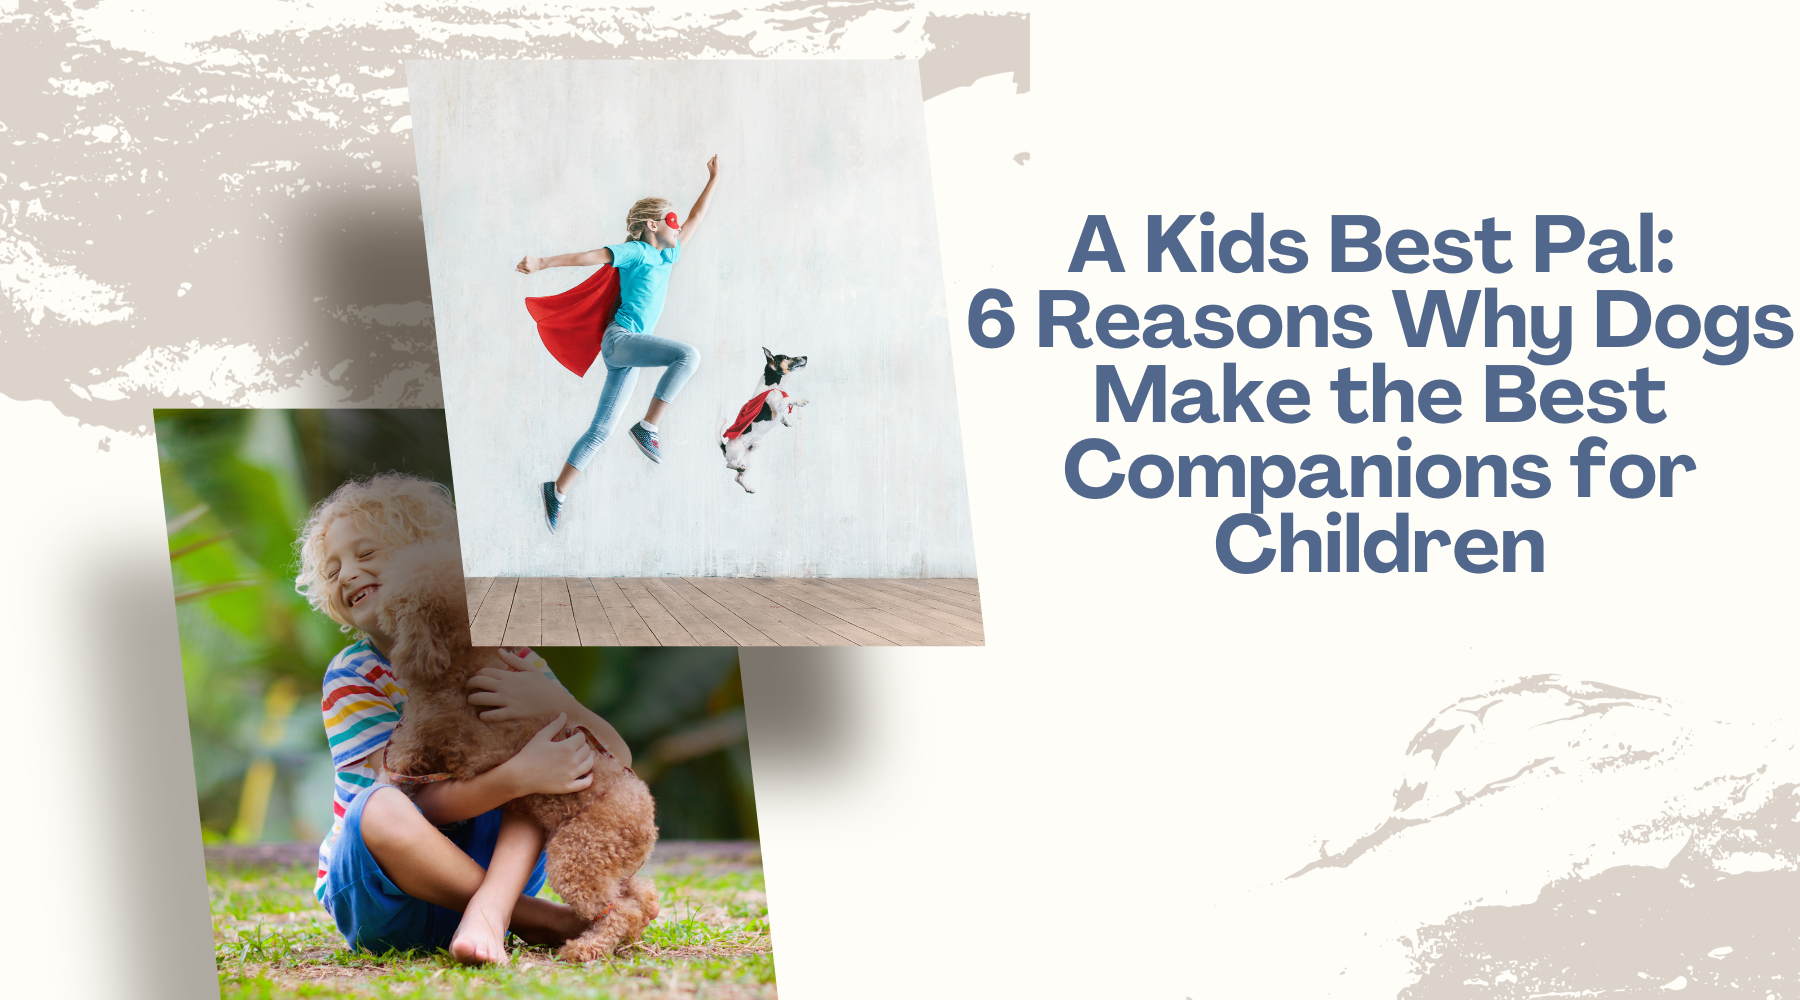 A Kids Best Pal: 6 Reasons Why Dogs Make the Best Companions for Children